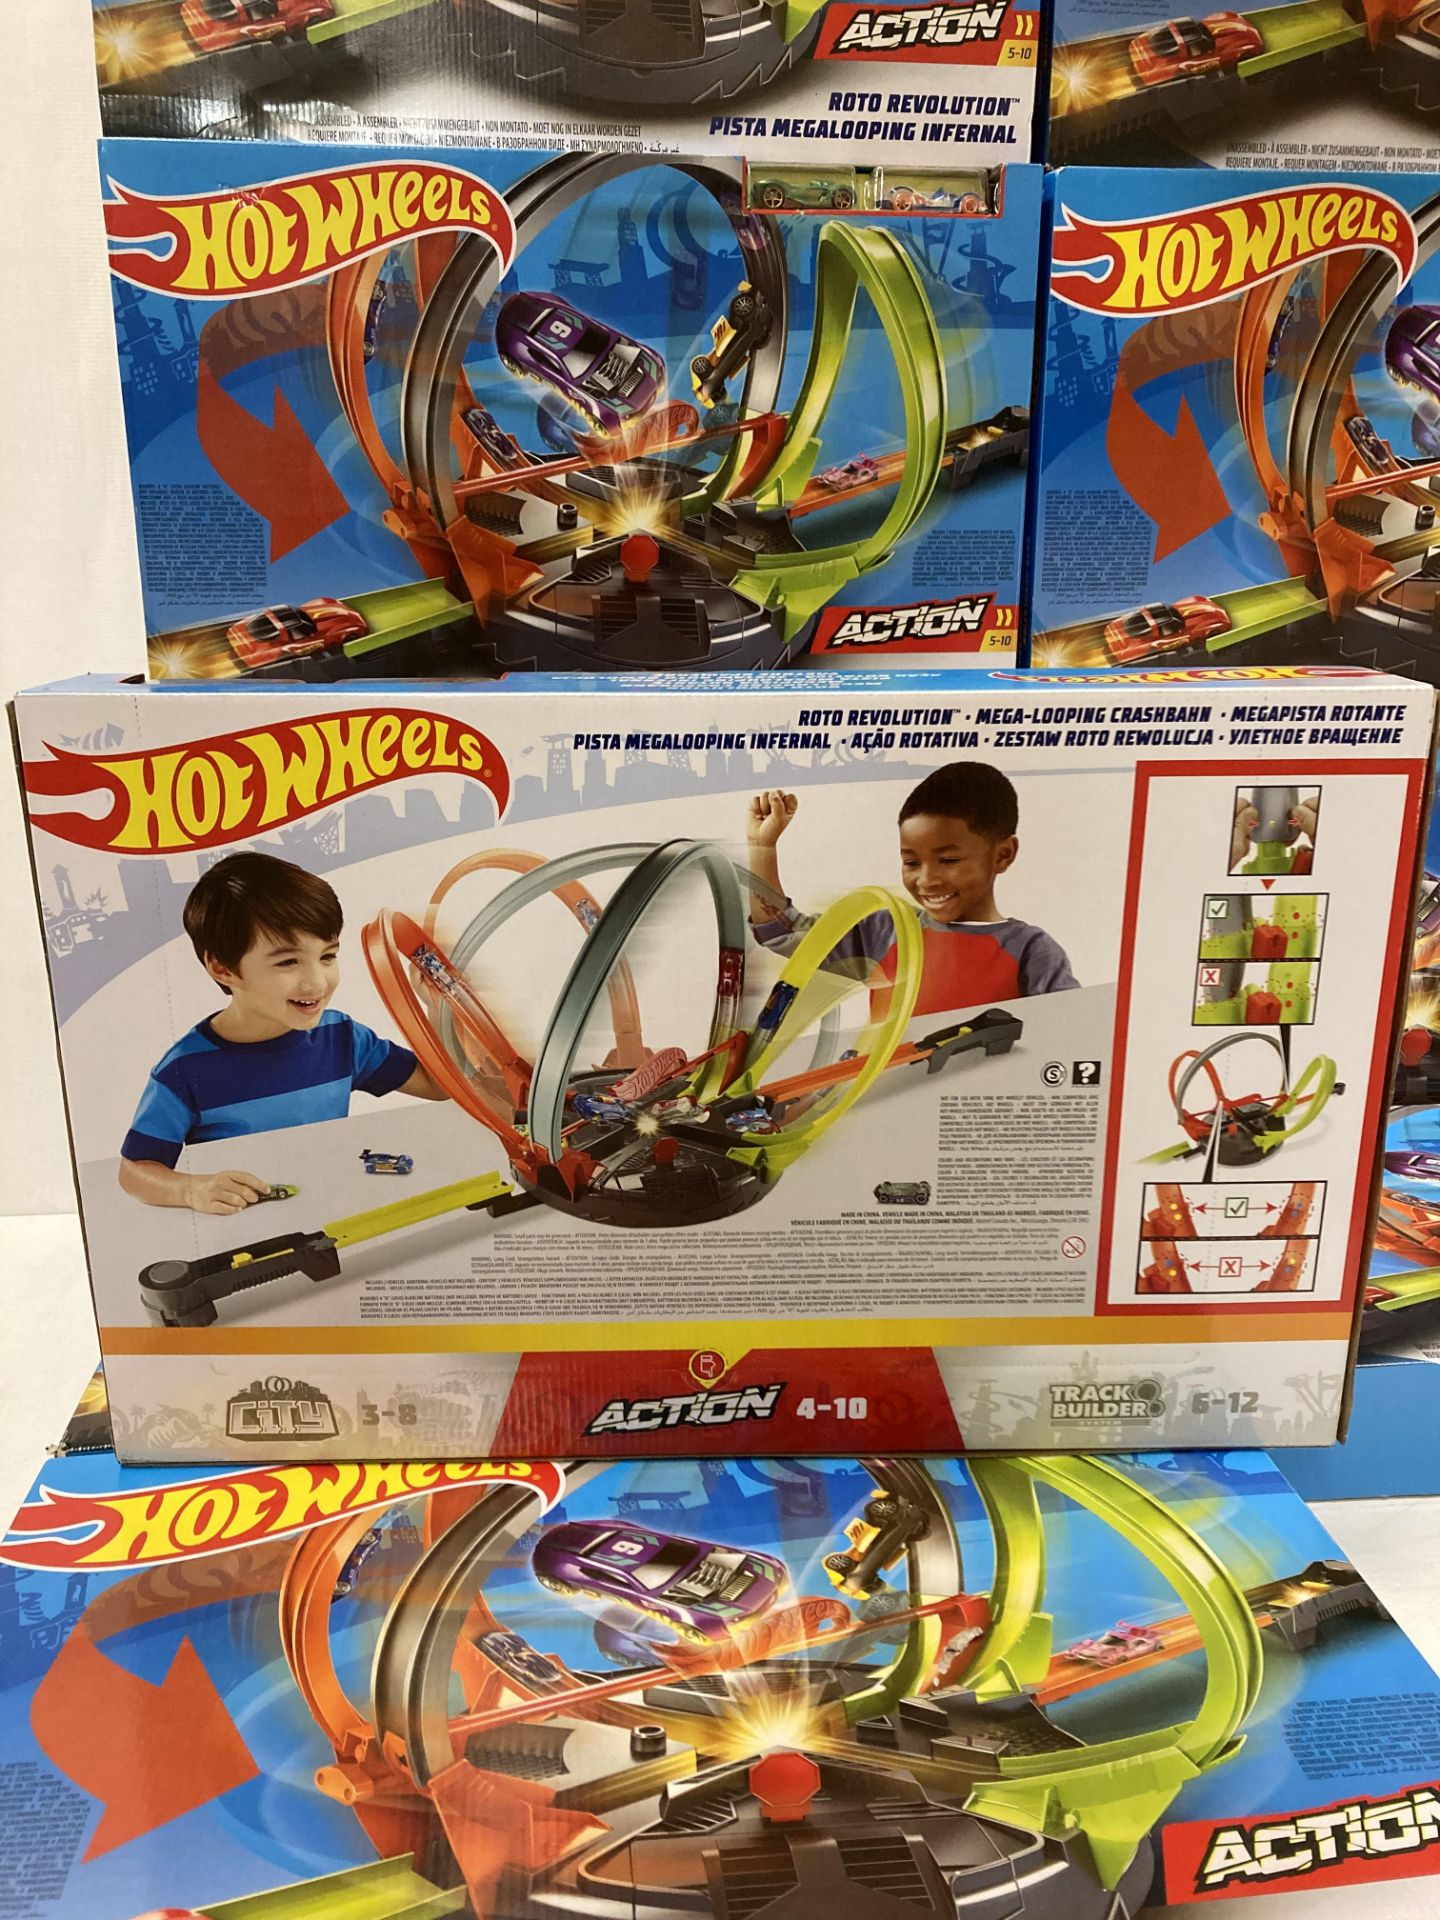 10 x Hot Wheels Roto Revolution Action Packs (saleroom location: Pallet P/R) Further - Image 2 of 3